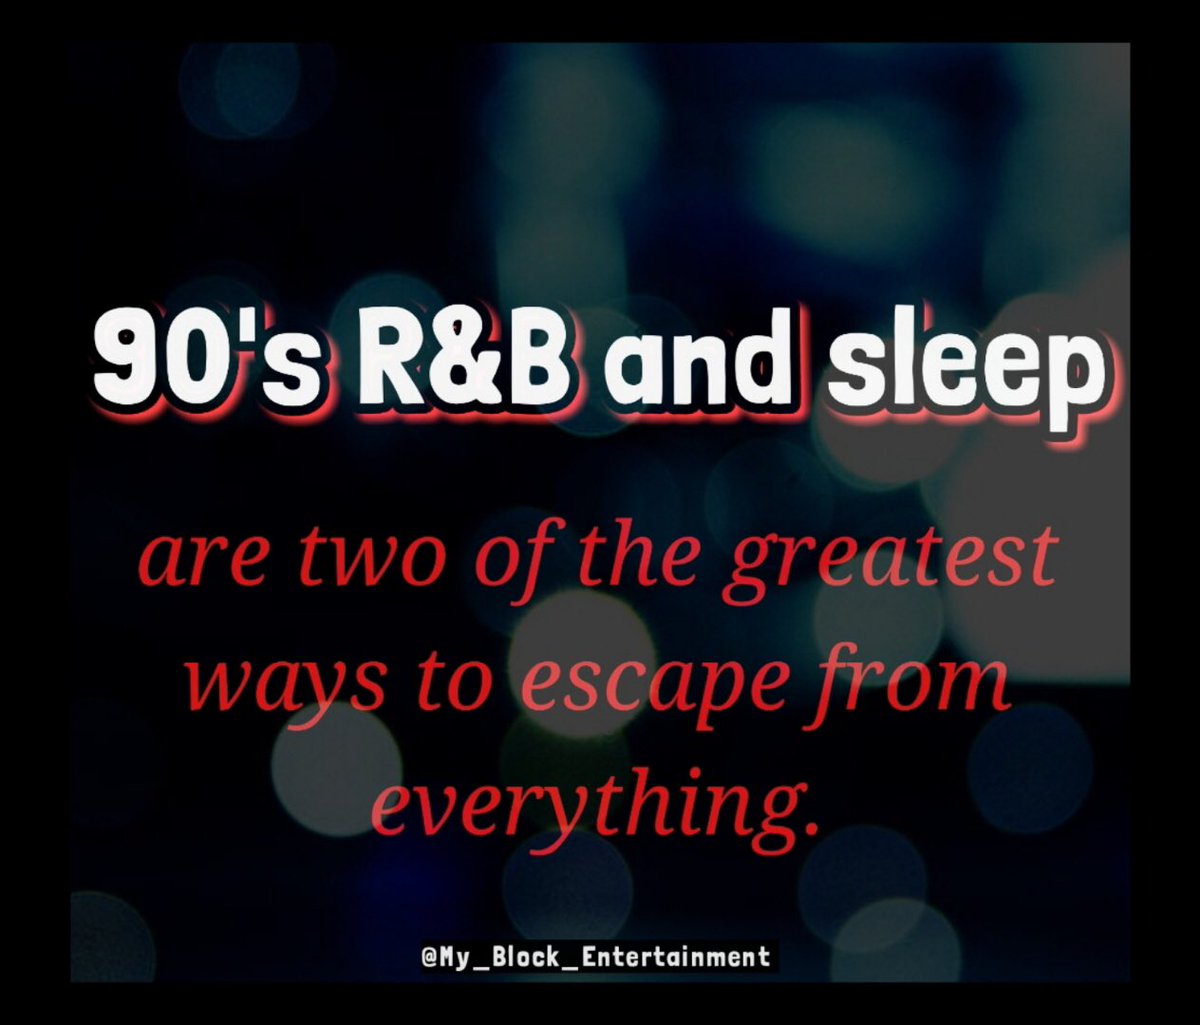 Sometimes it's just that simple.🎵💤 What are a few of your favorite songs to help you escape from your problems? #TBT #ThrowbackMusic #90sRnB #90sRnBJunkie #90sRnBMusic #90sRnBAndChill #RnBMatters #RealRnB #SlowJams #QuietStorm #MusicIsMyEscape #OldSchoolJams #DoNotDisturb